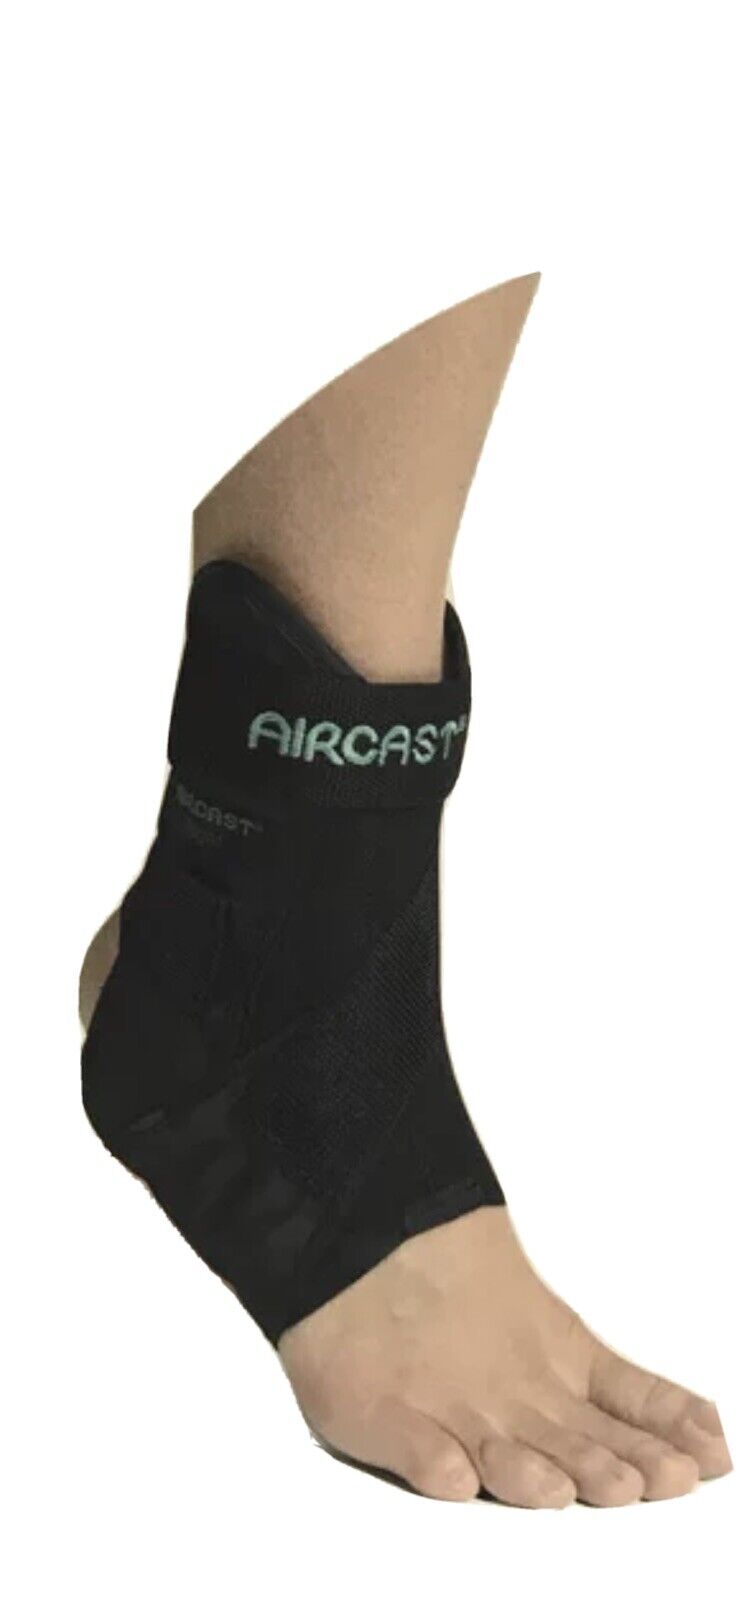 DJO 81-02MSL Aircast Ankle Brace, Small, Left Ankle Support NEW FREE SHIPPING